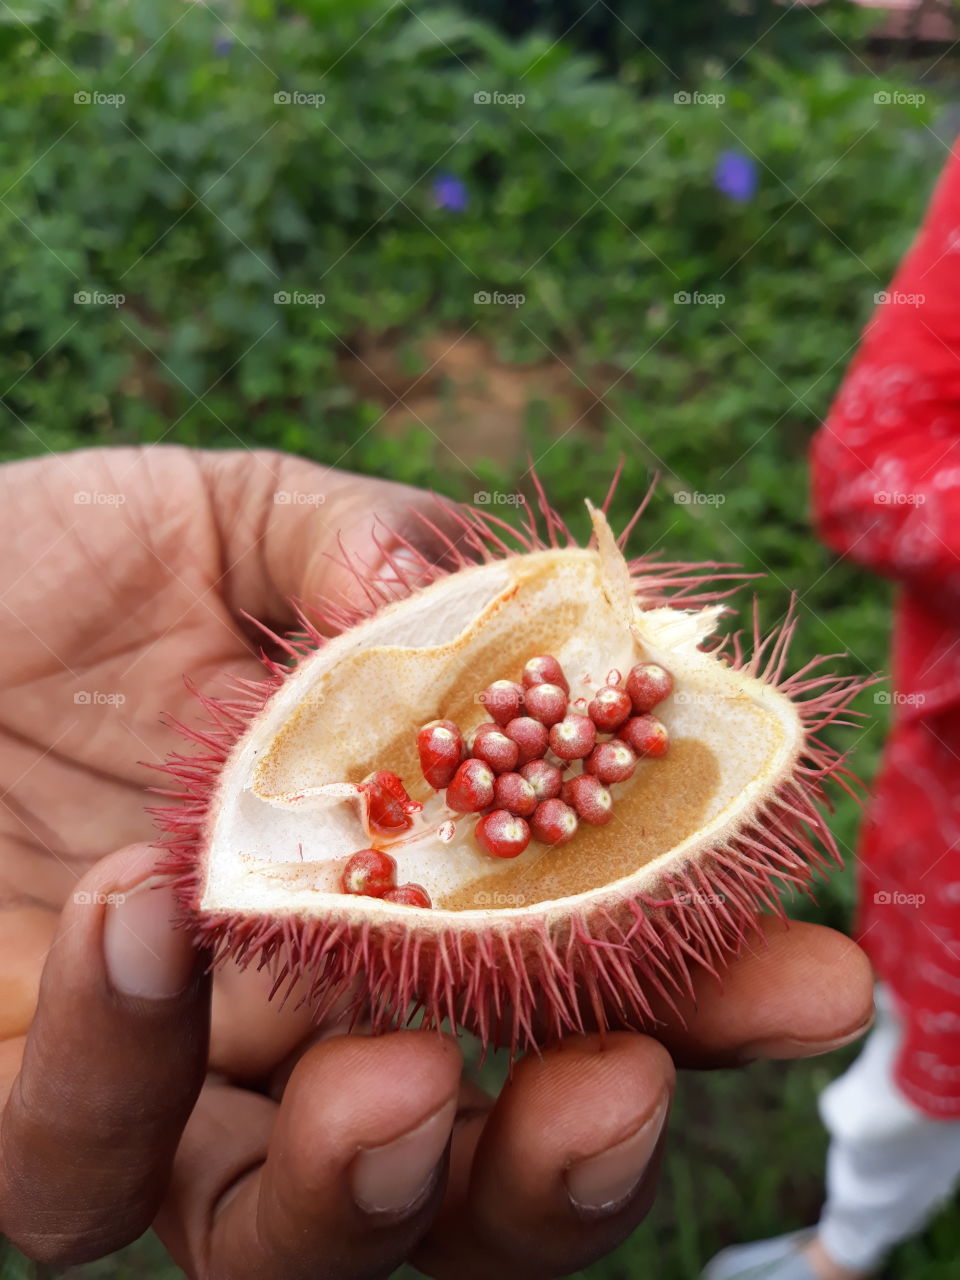 Indian rambutant .
the color from the seed you can use it as lipstick color !